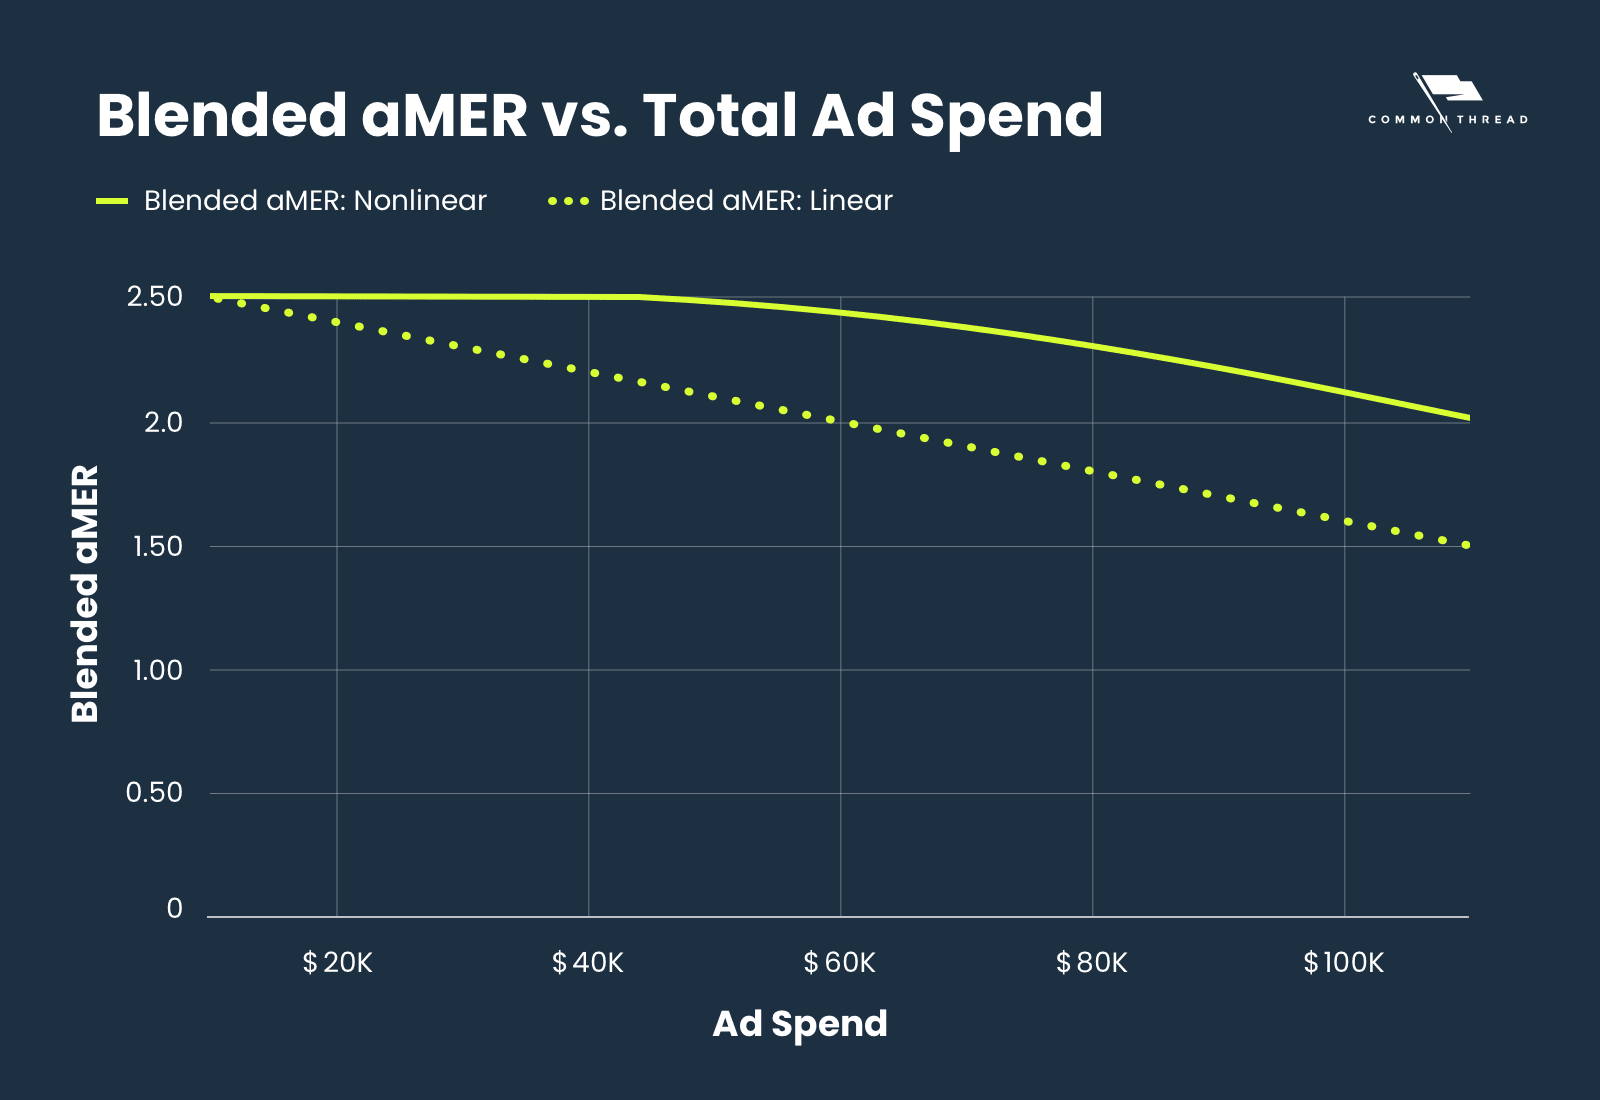 blended aMER vs. total ad spend showing both (nonlinear and linear)